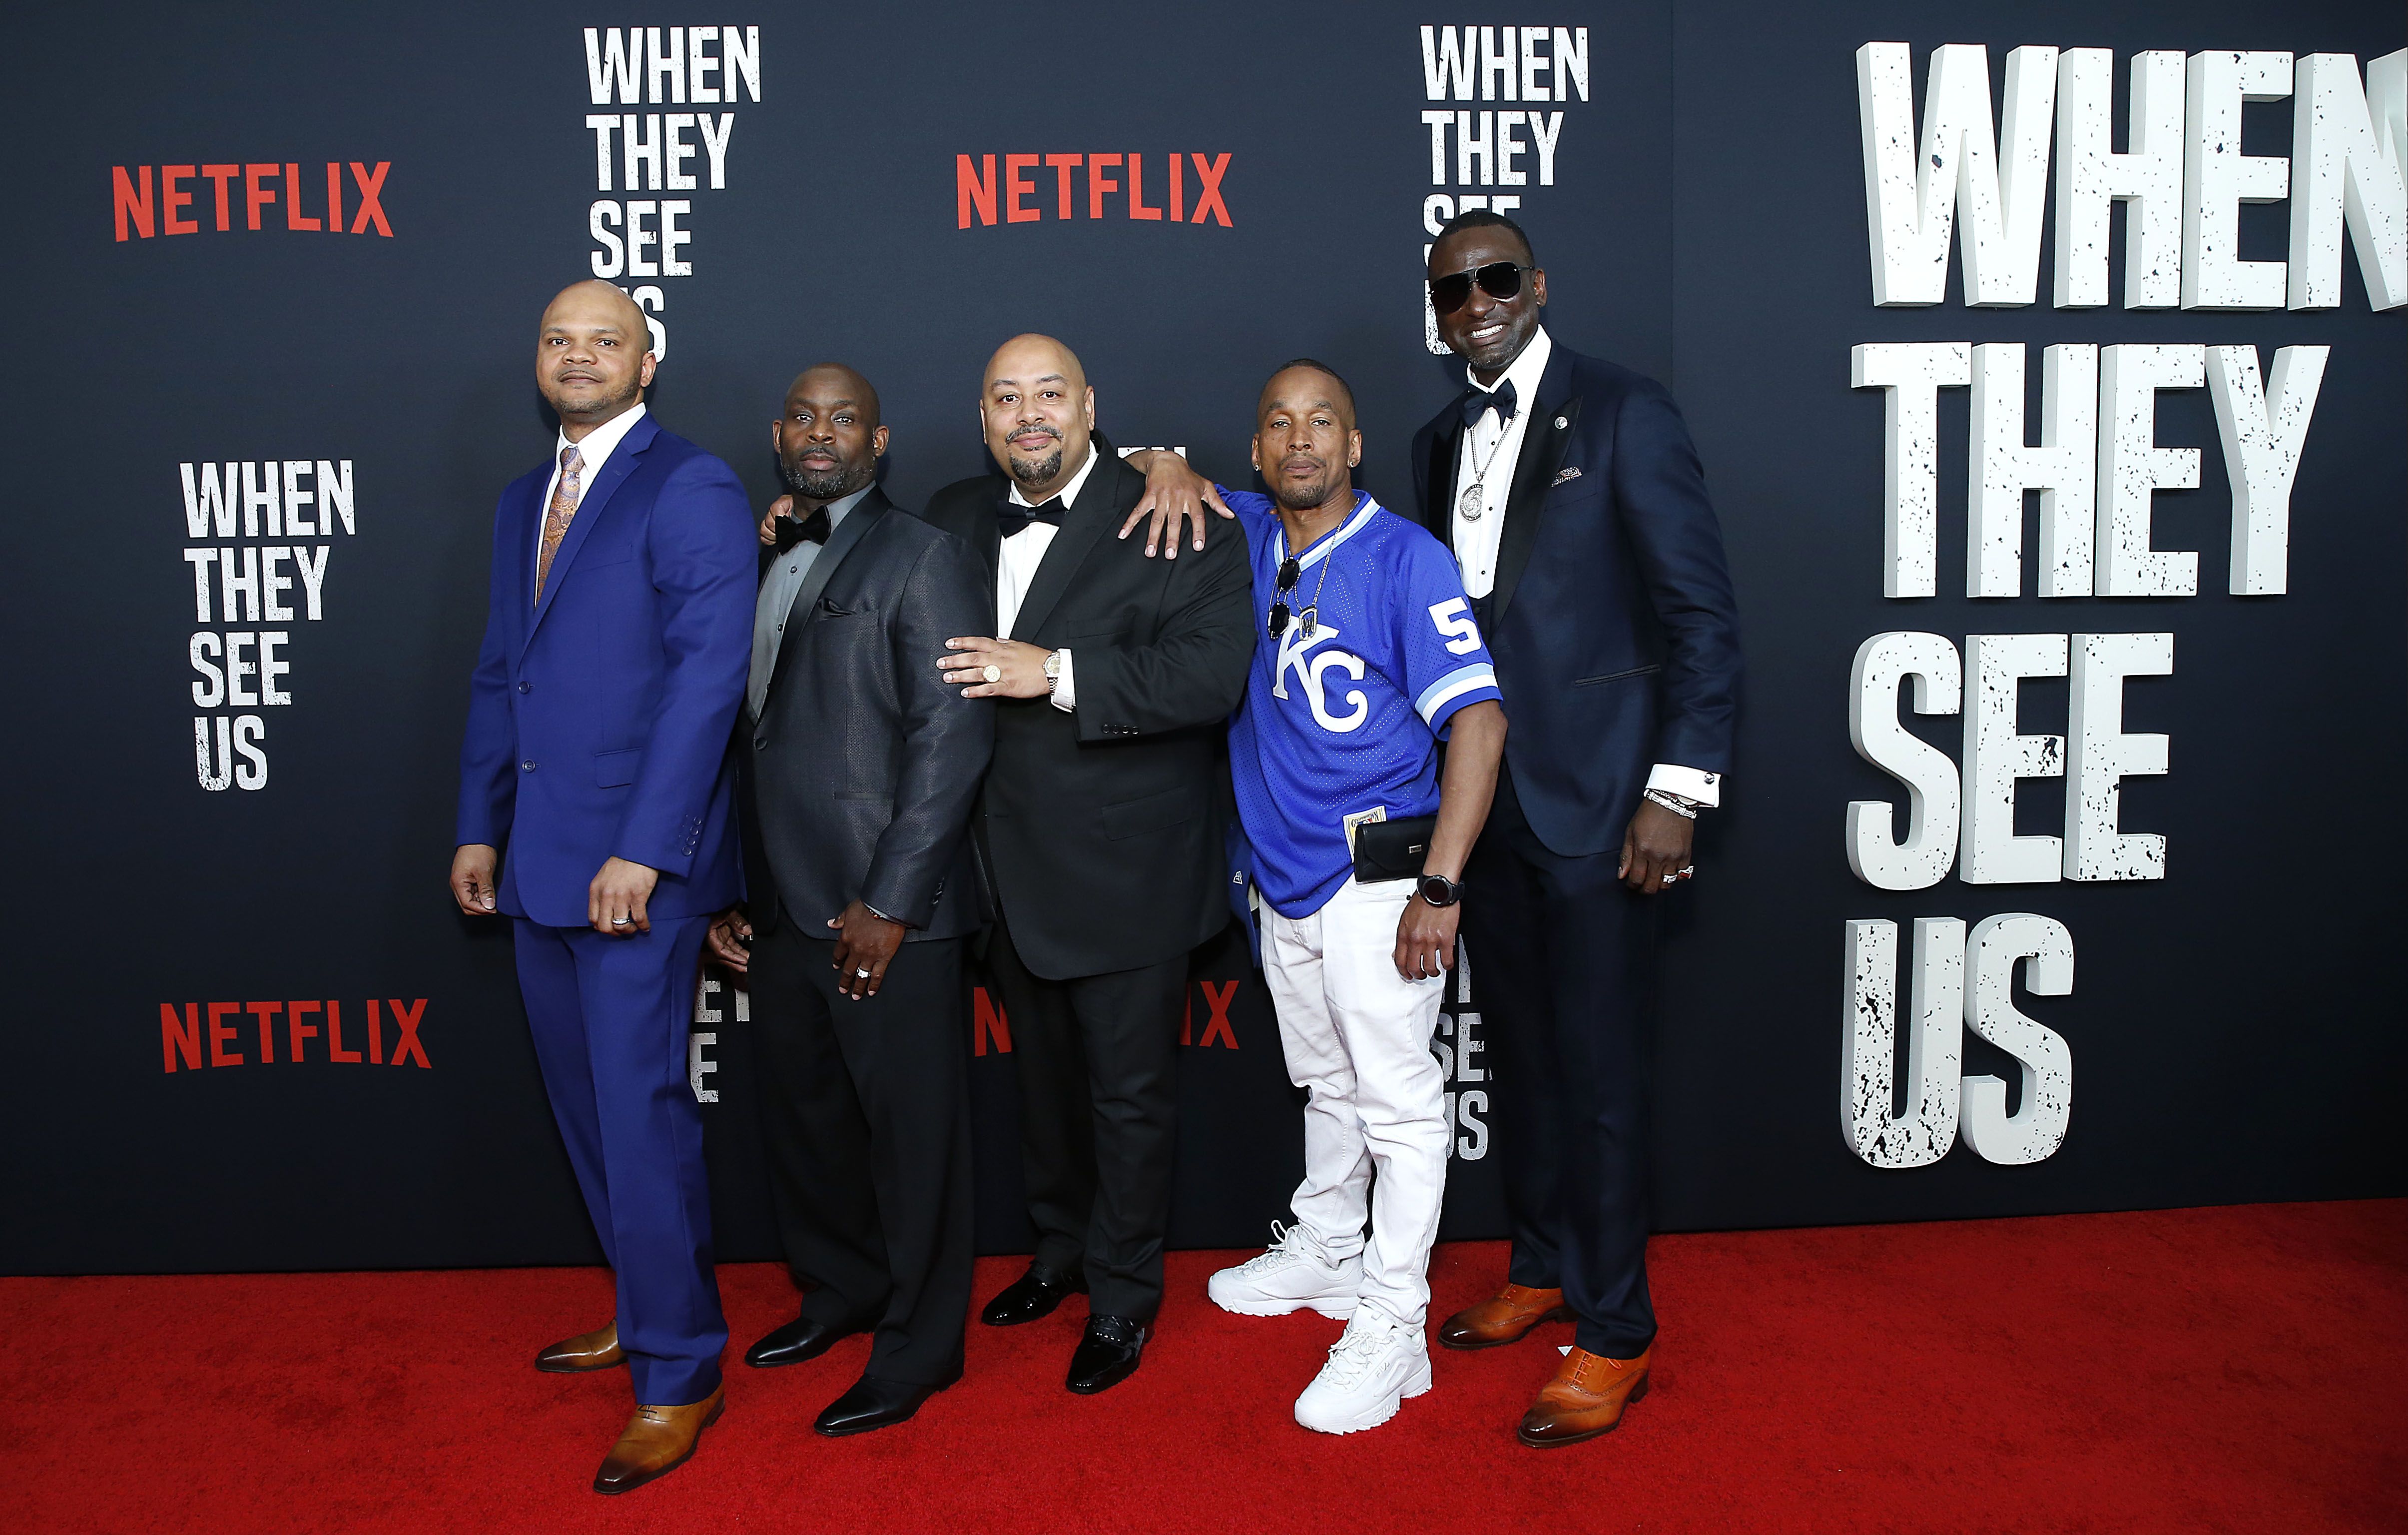 When They See Us' on Netflix vs. 'The Central Five' Documentary by Ken Burns